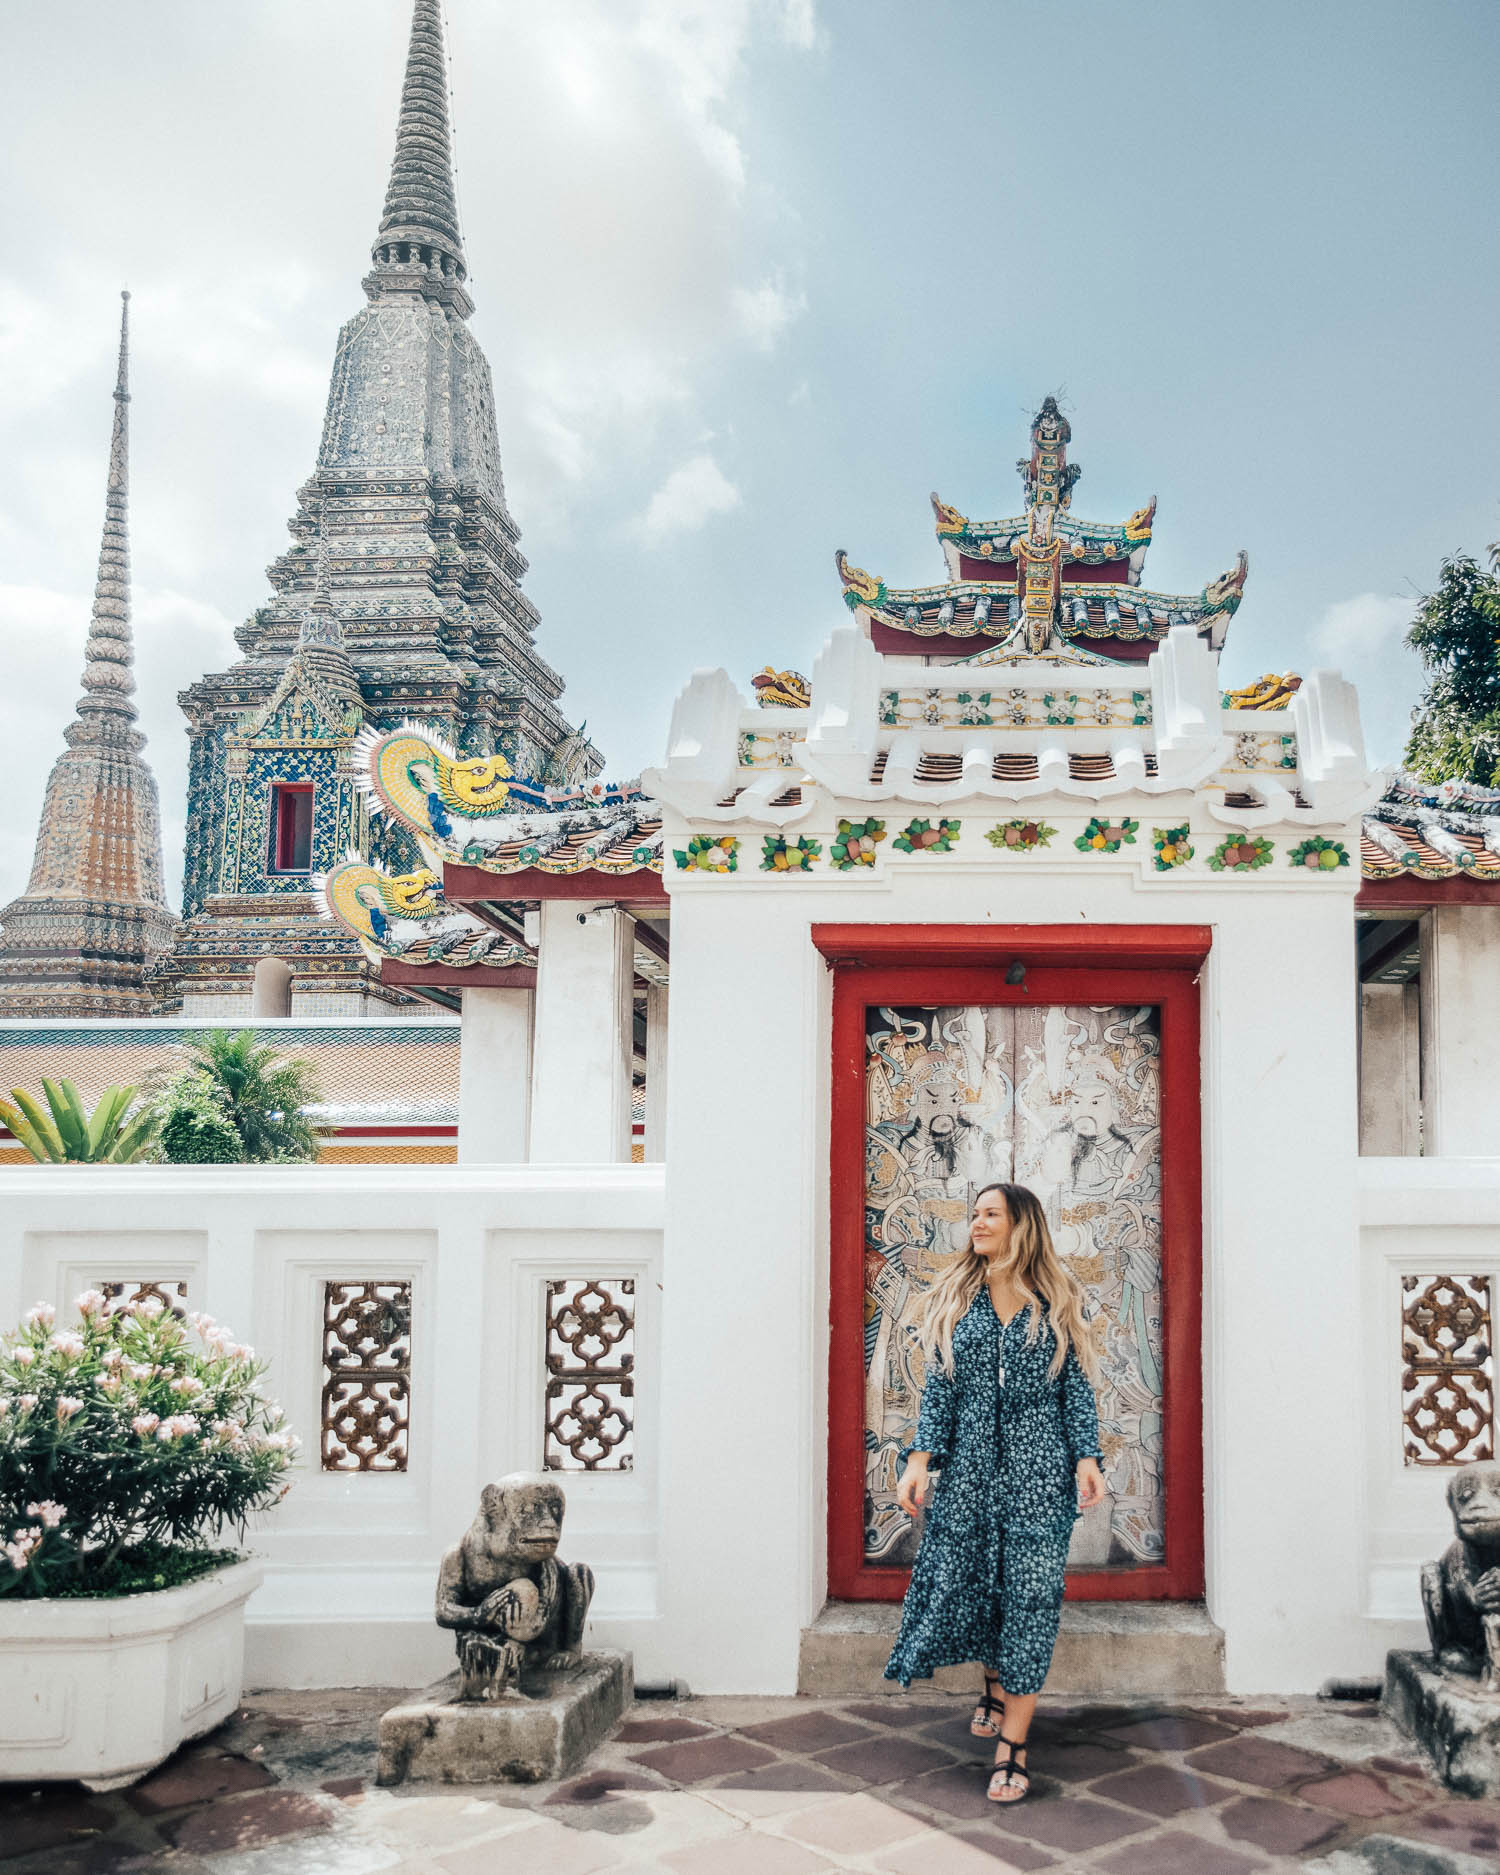 Adaras at Wat Pho in Bangkok, Thailand - What to wear when visiting temples